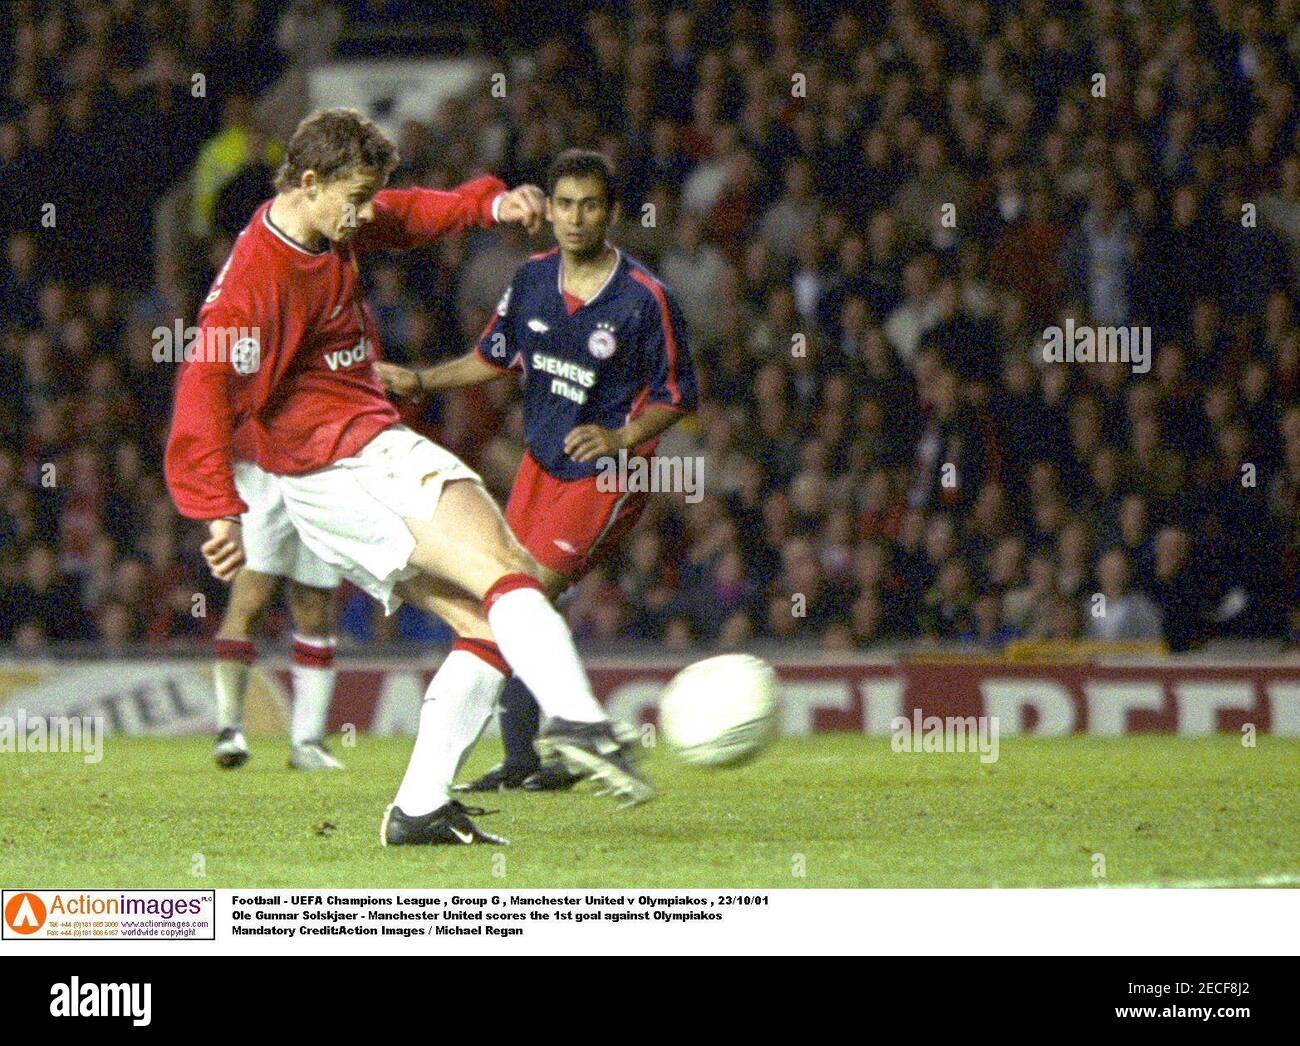 Football - UEFA Champions League , Group G , Manchester United v Olympiakos  , 23/10/01 Ole Gunnar Solskjaer - Manchester United scores the 1st goal  against Olympiakos Mandatory Credit:Action Images / Michael Regan Stock  Photo - Alamy